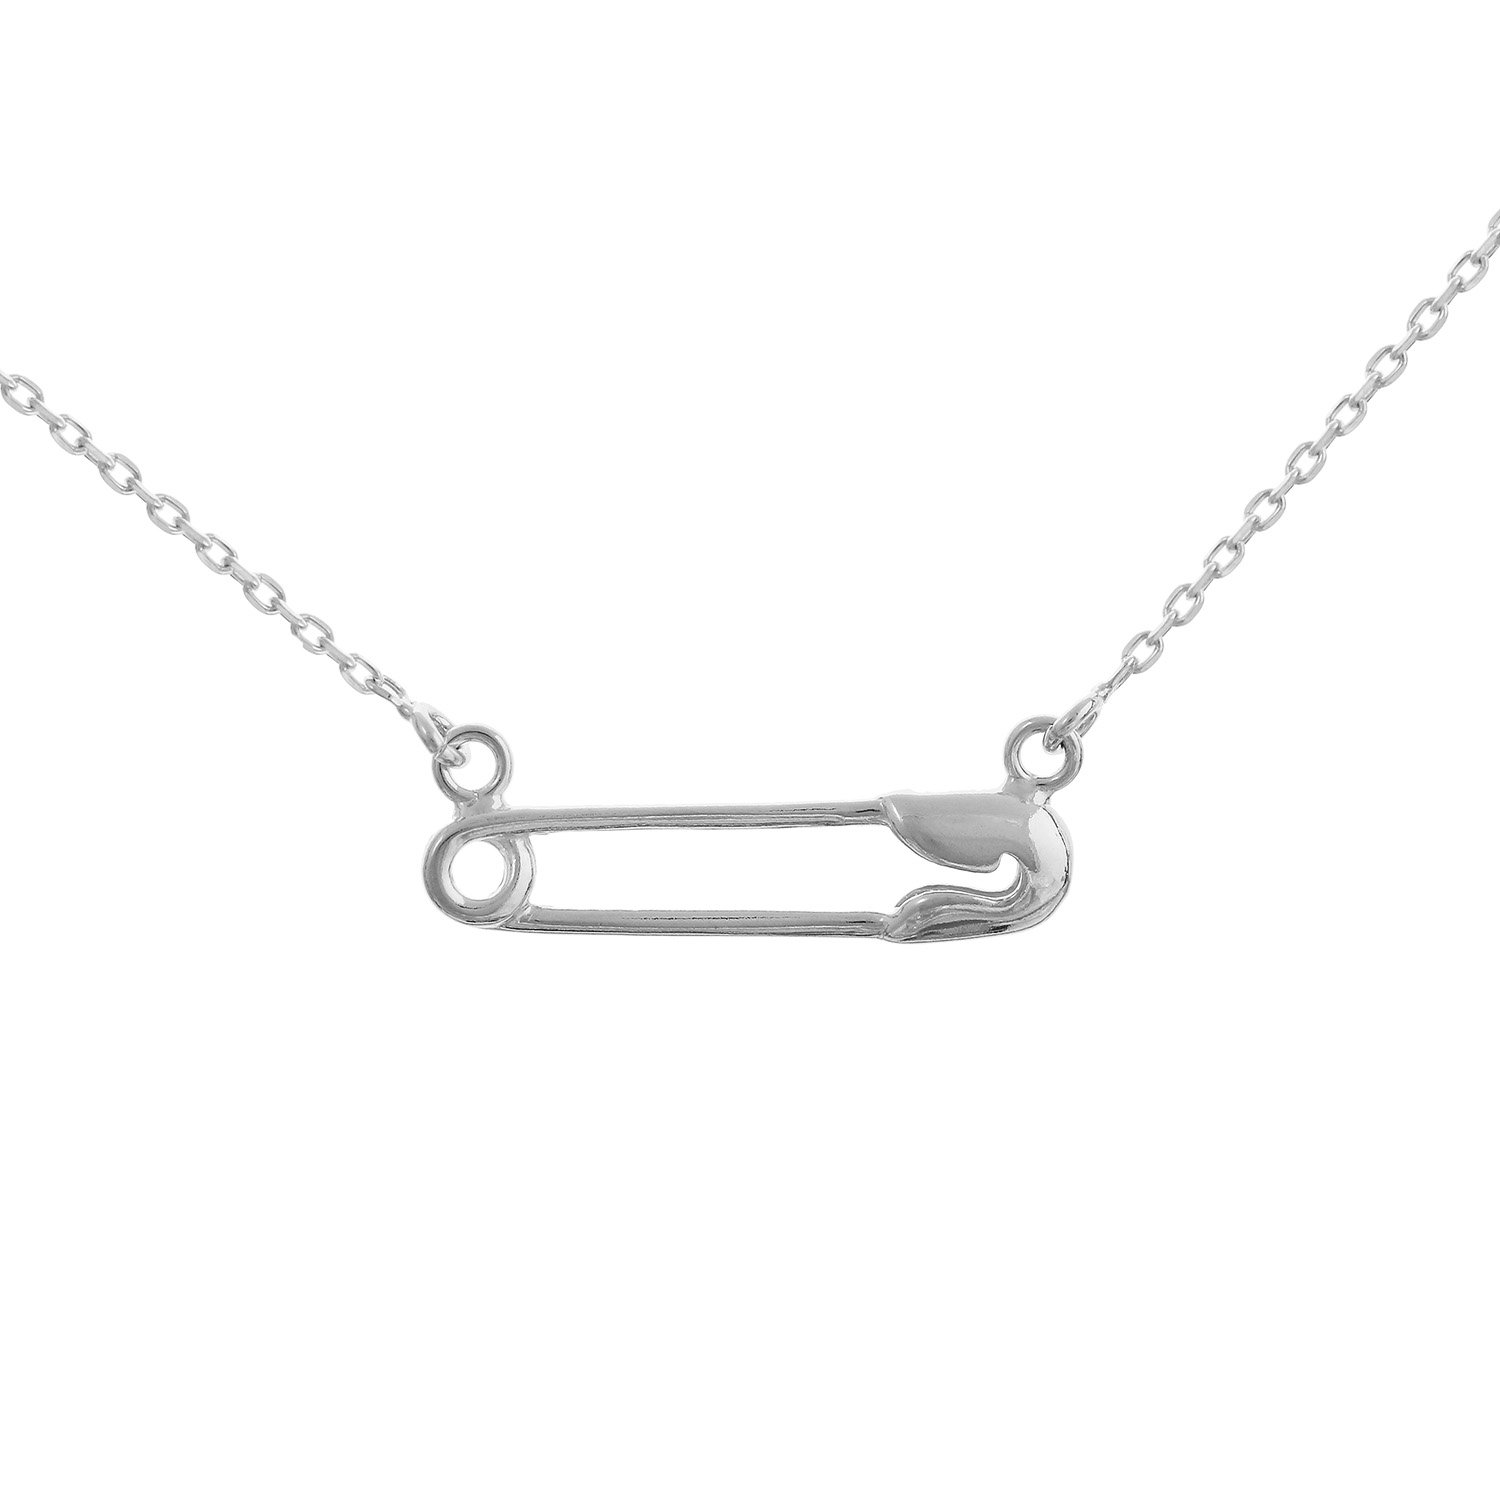 Safety Pin Necklace | Customizable Jewelry | Nickel & Suede